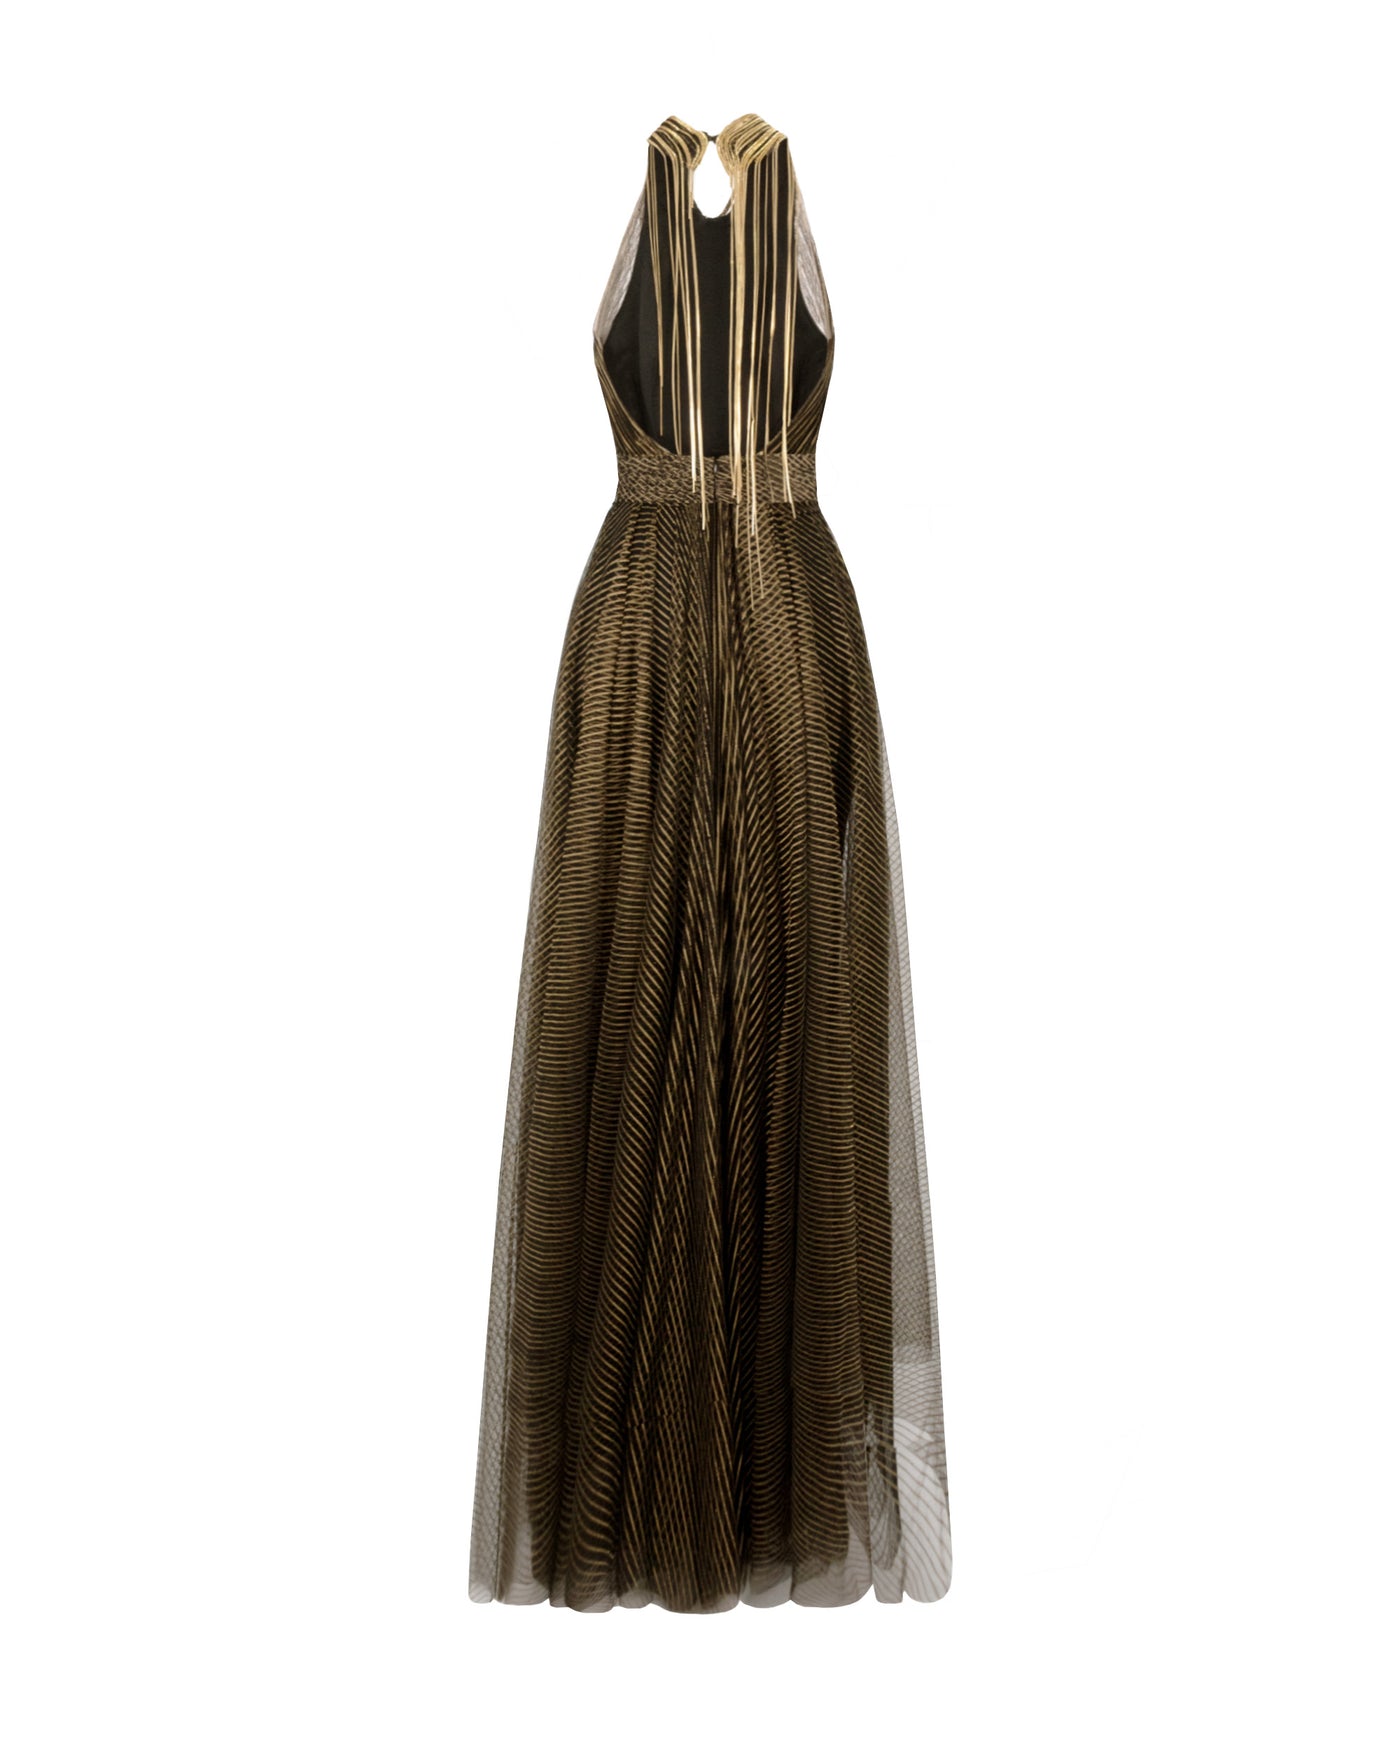 Tulle Dress with Metallic Fringes